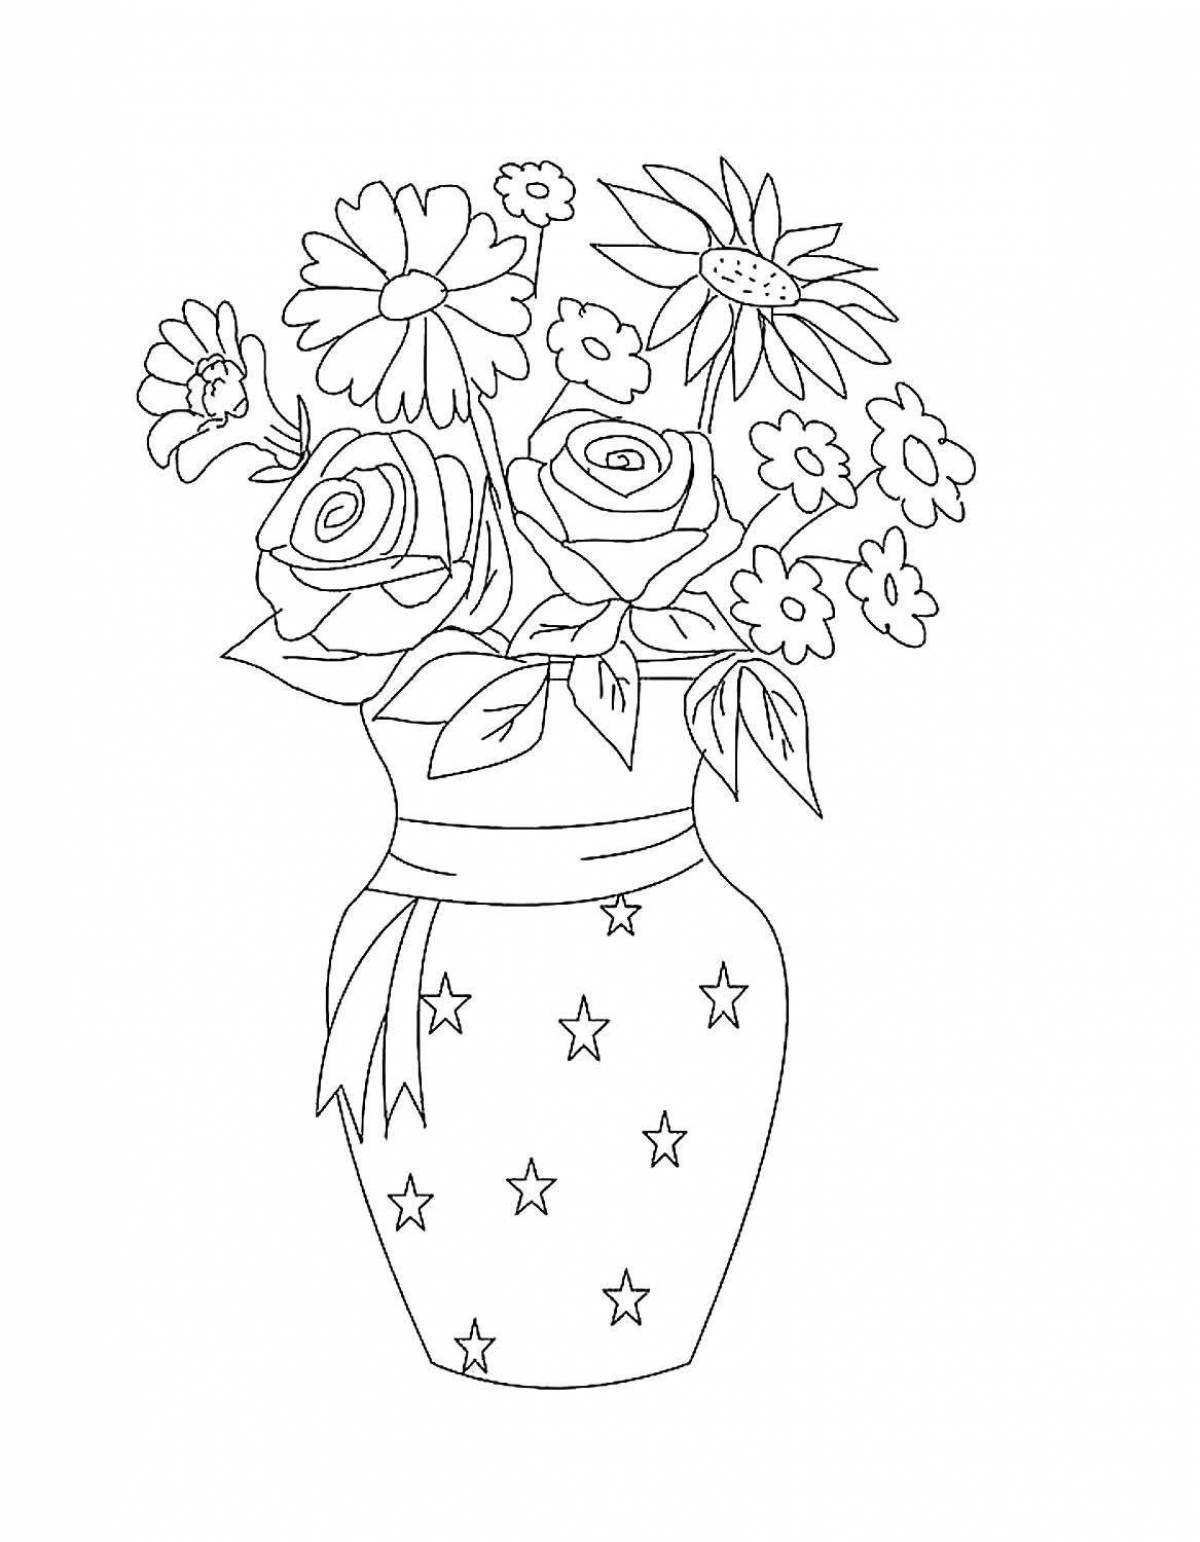 Gorgeous vase of flowers coloring book for children 5-6 years old